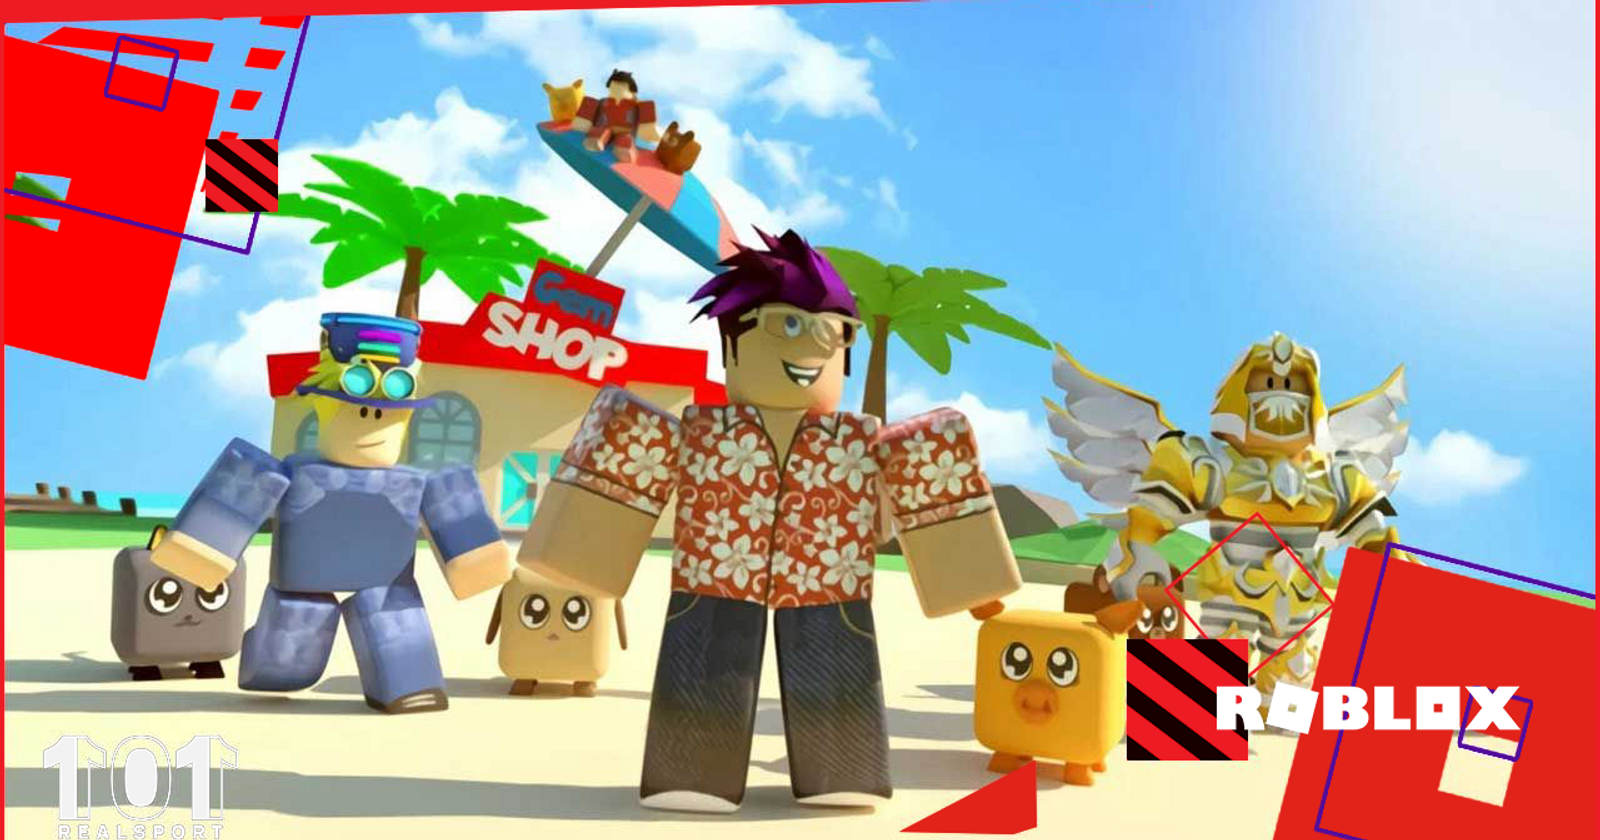 UPDATED* Roblox Promo Codes for May 2021: New bundles, All Free Items &  Cosmetics Currently Available